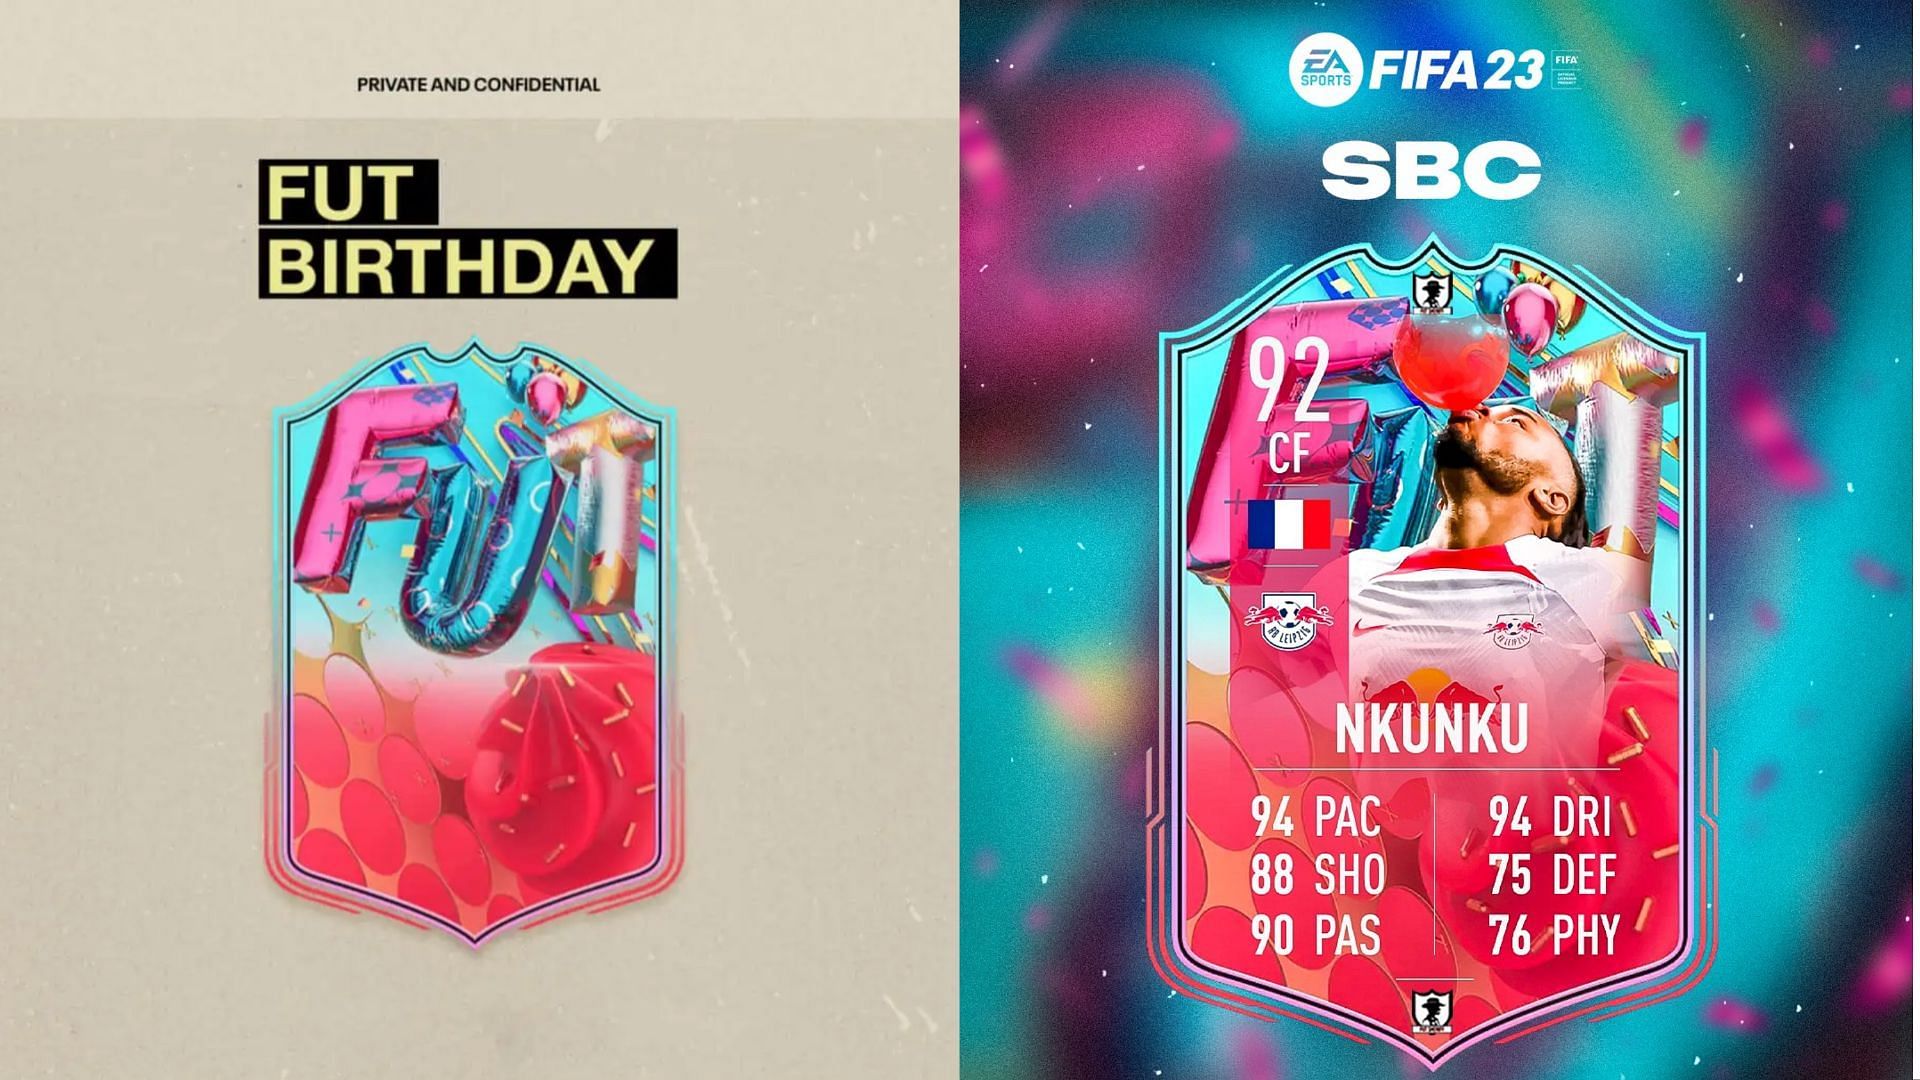 Christopher Nkunku could become one of the best cards on the FIFA 23 FUT Birthday promo (Images via EA Sports, Twitter/FUT Sheriff)